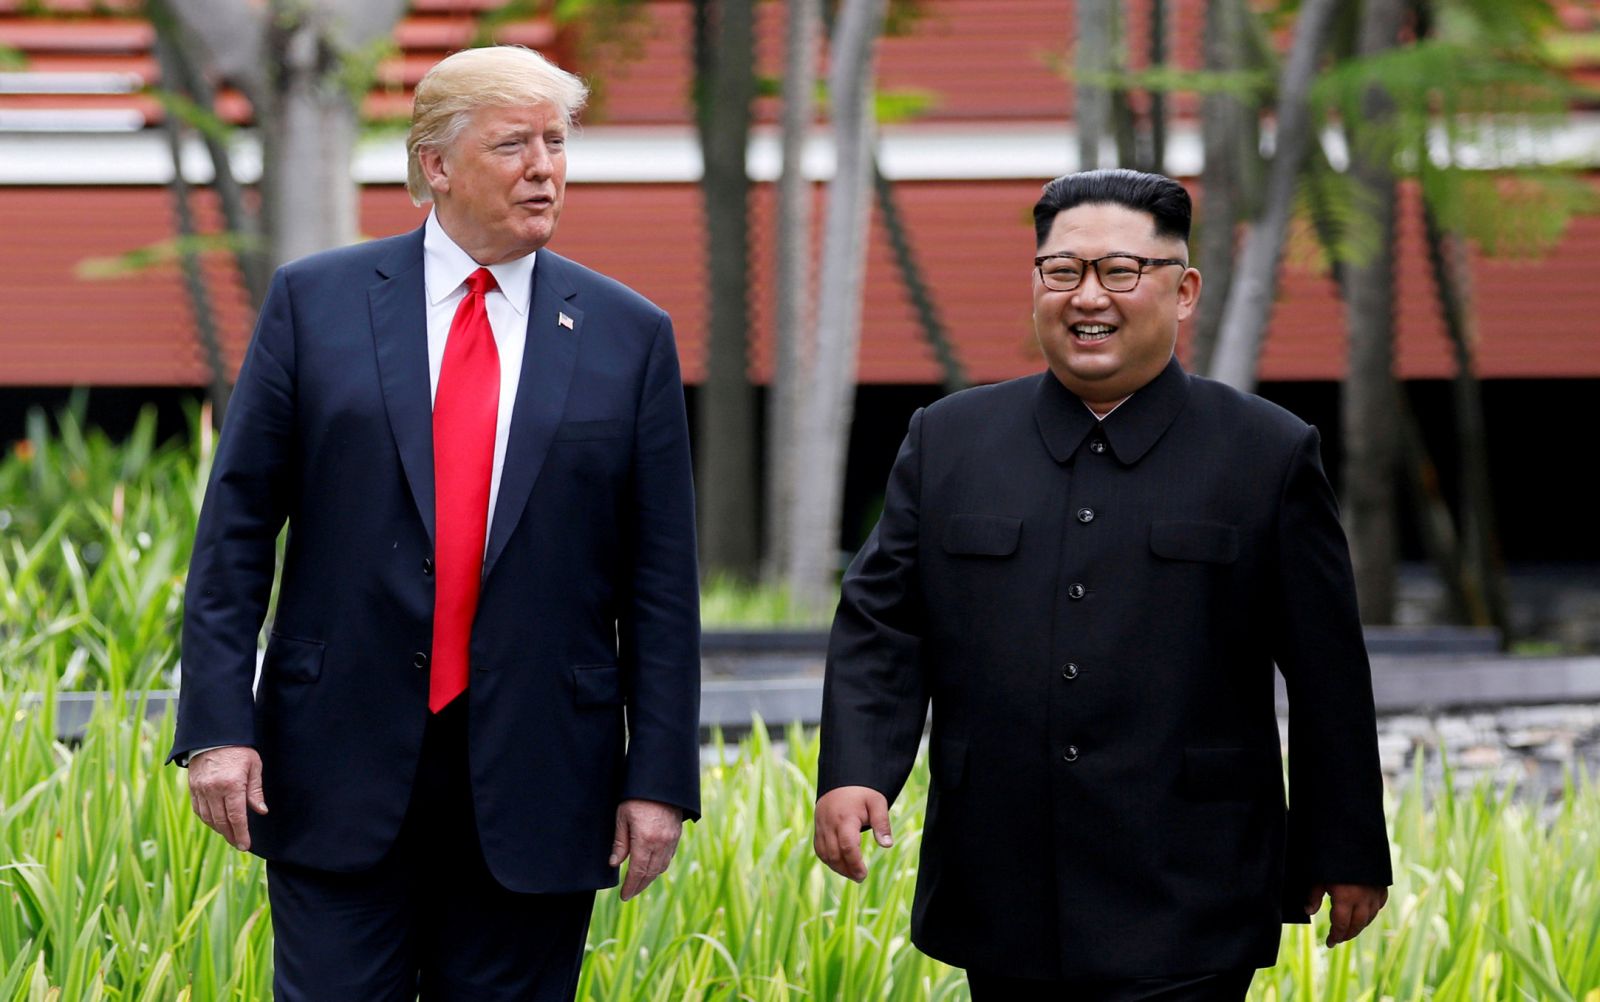 Experts say the Trump-Kim Summit will have a great influence on Vietnam's real estate sector.